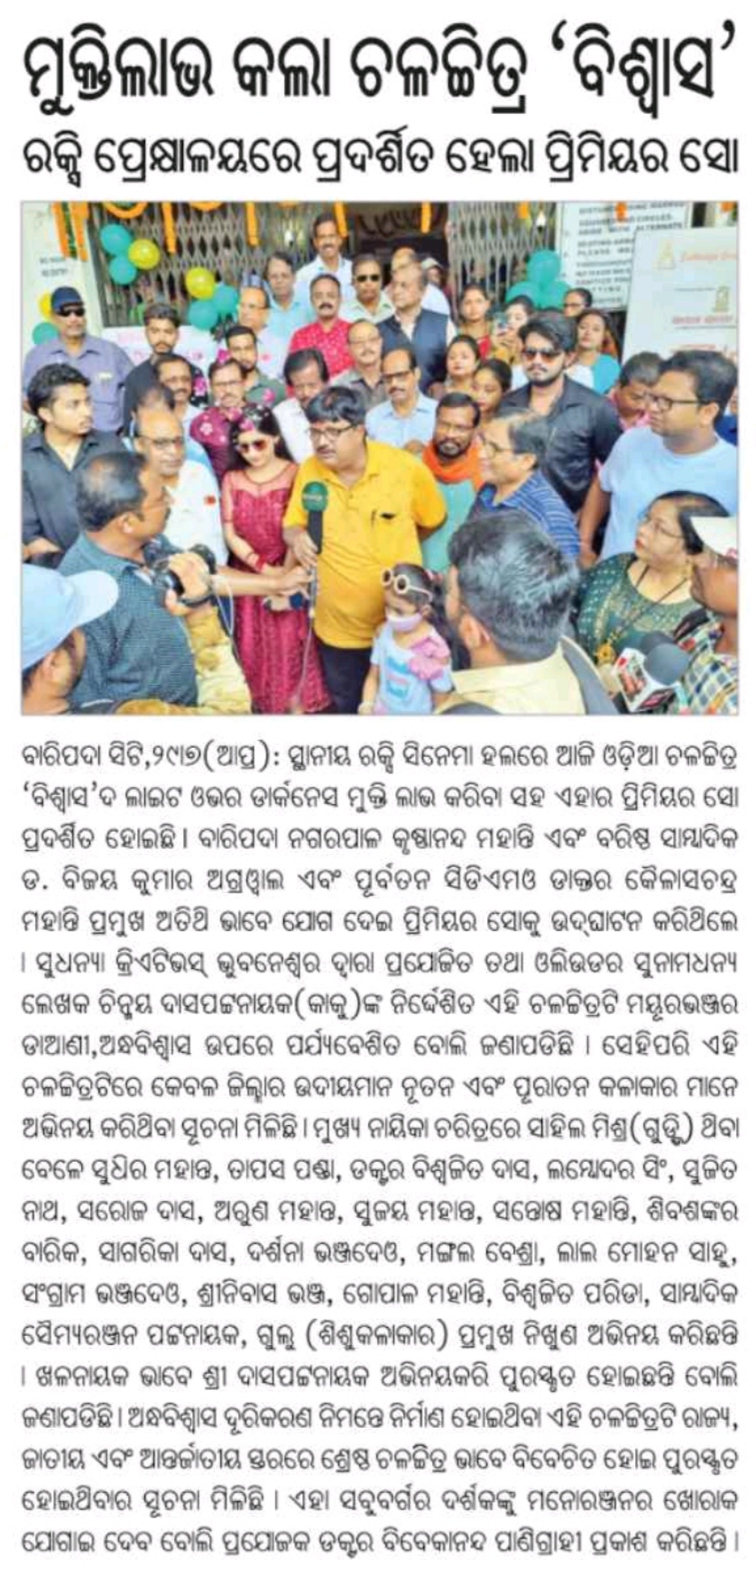 'Bishwaas - The Light Over Darkness' movie release news published in Prameya, Baripada edition, Dt: 30 July 2022